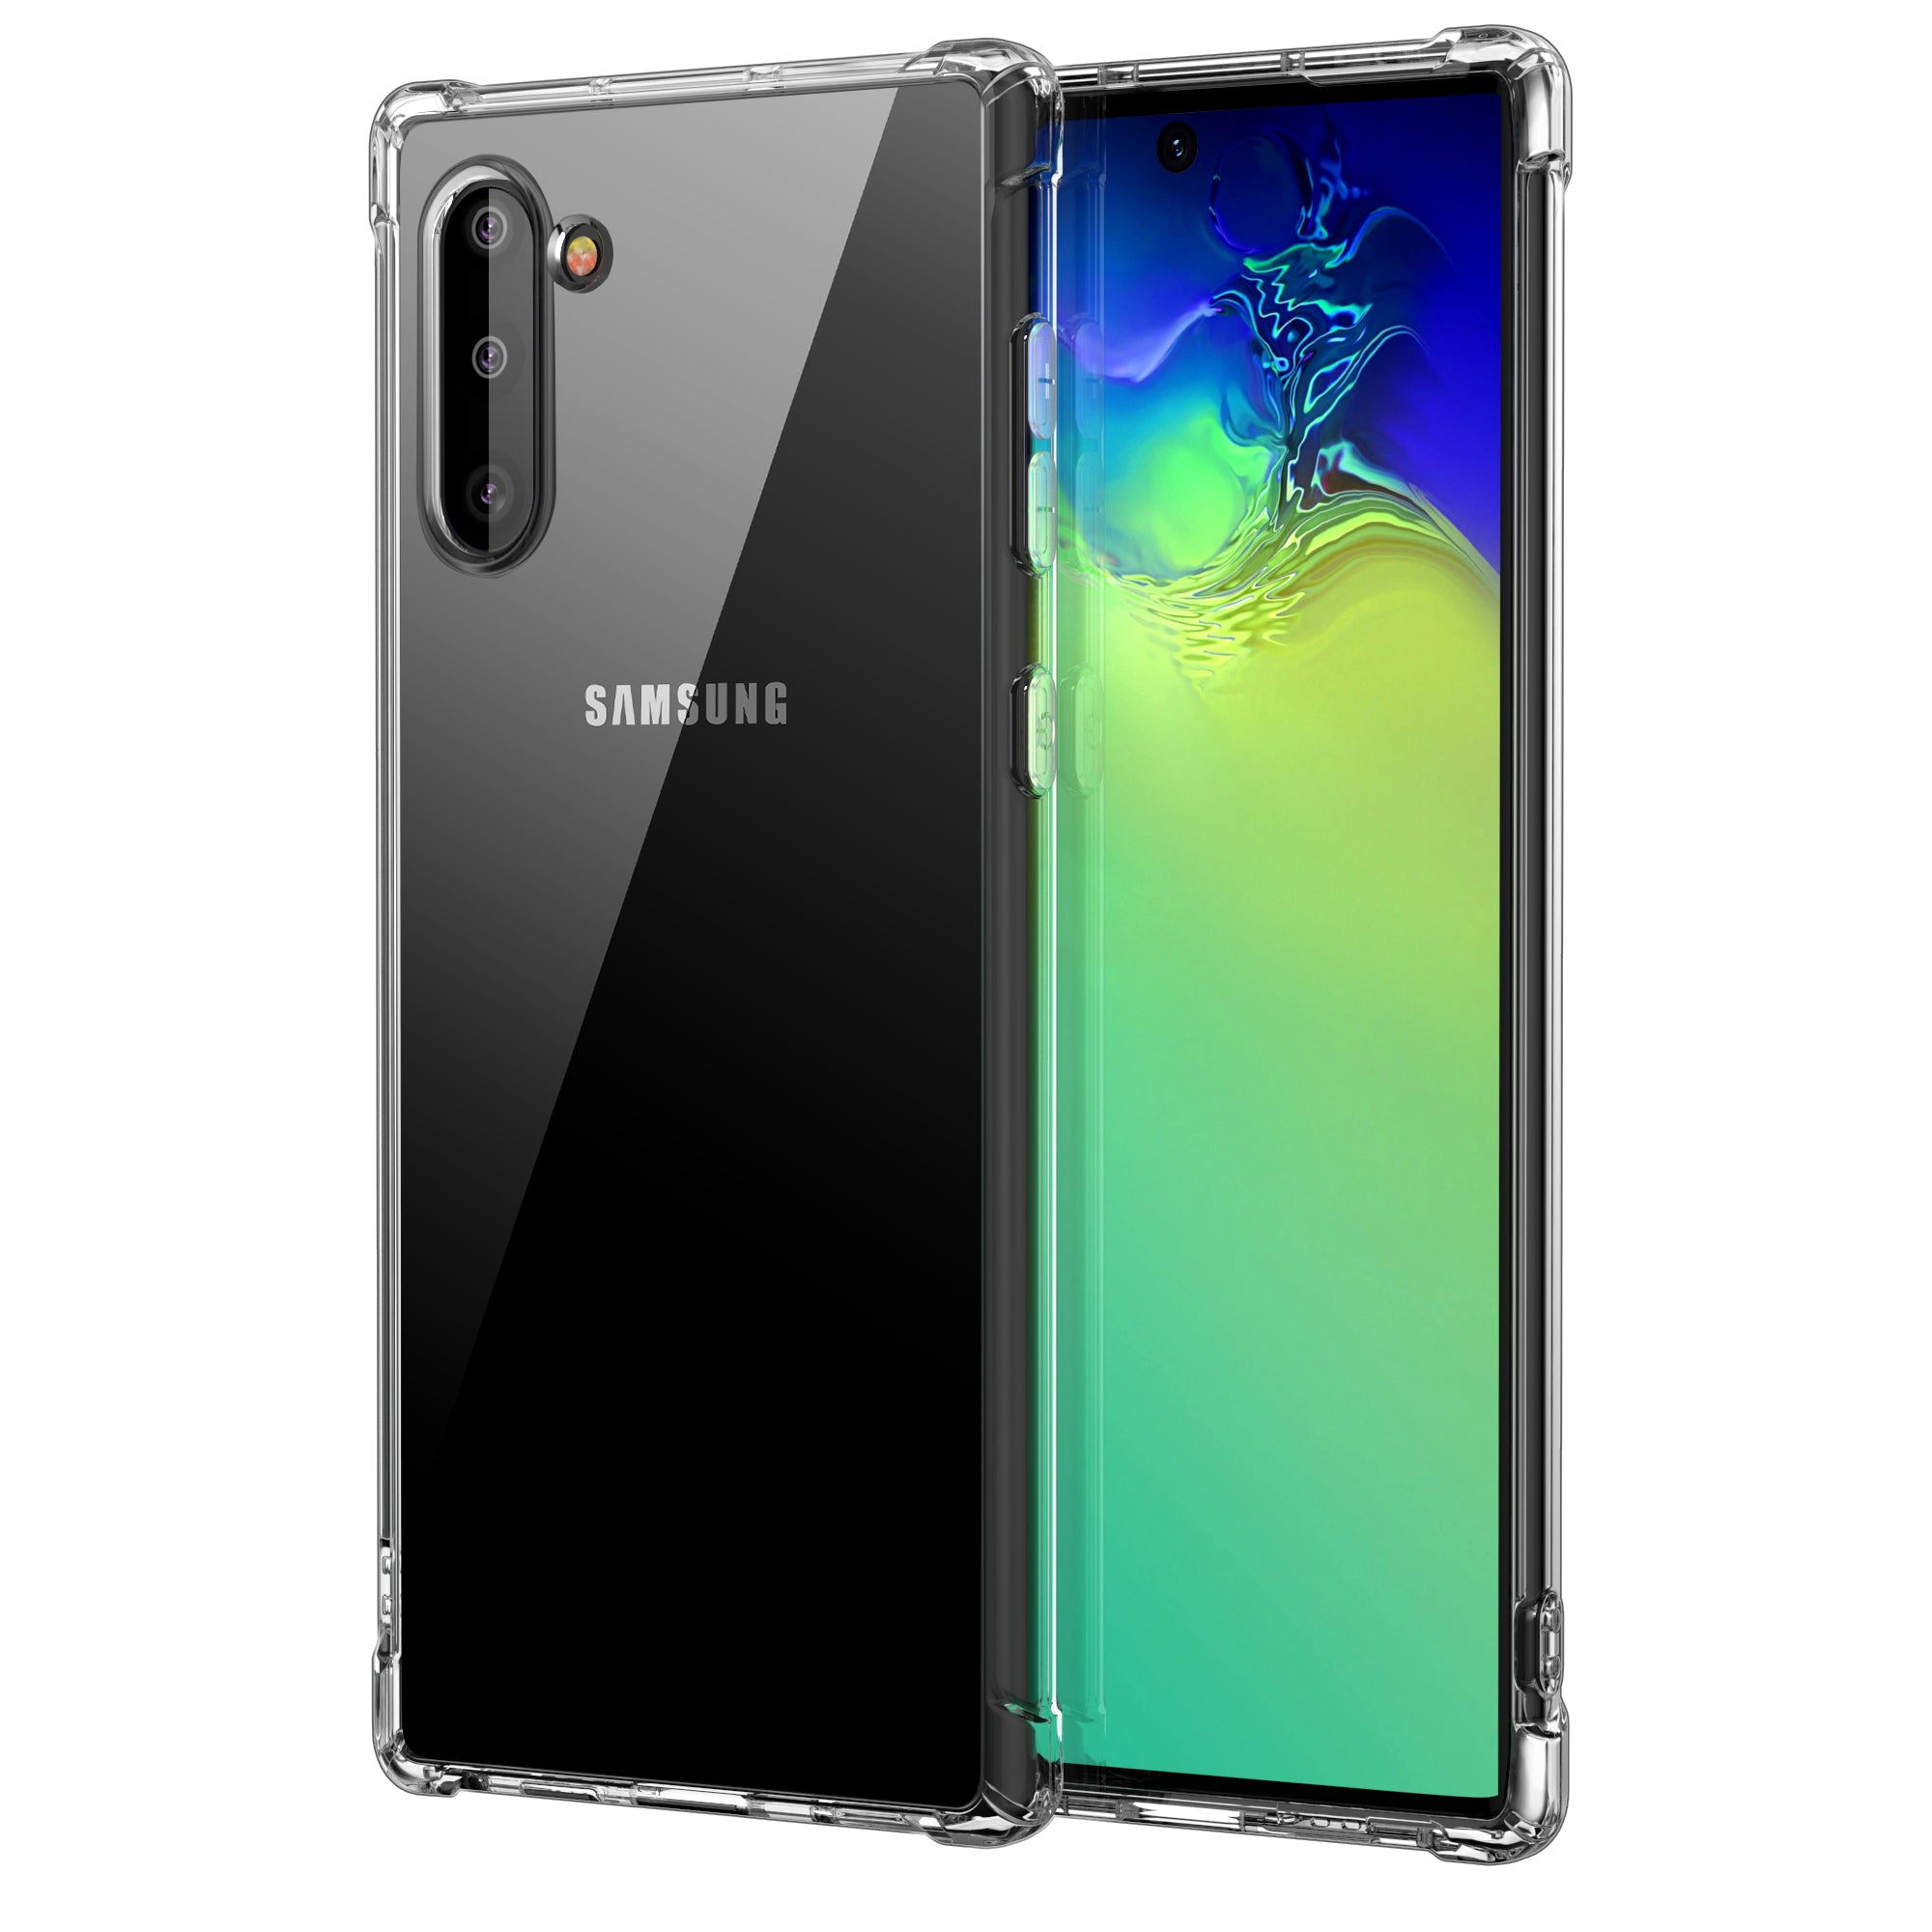 Samsung Galaxy Note 10 Plus Case Clear Heavy Duty Shockproof Slim Cover